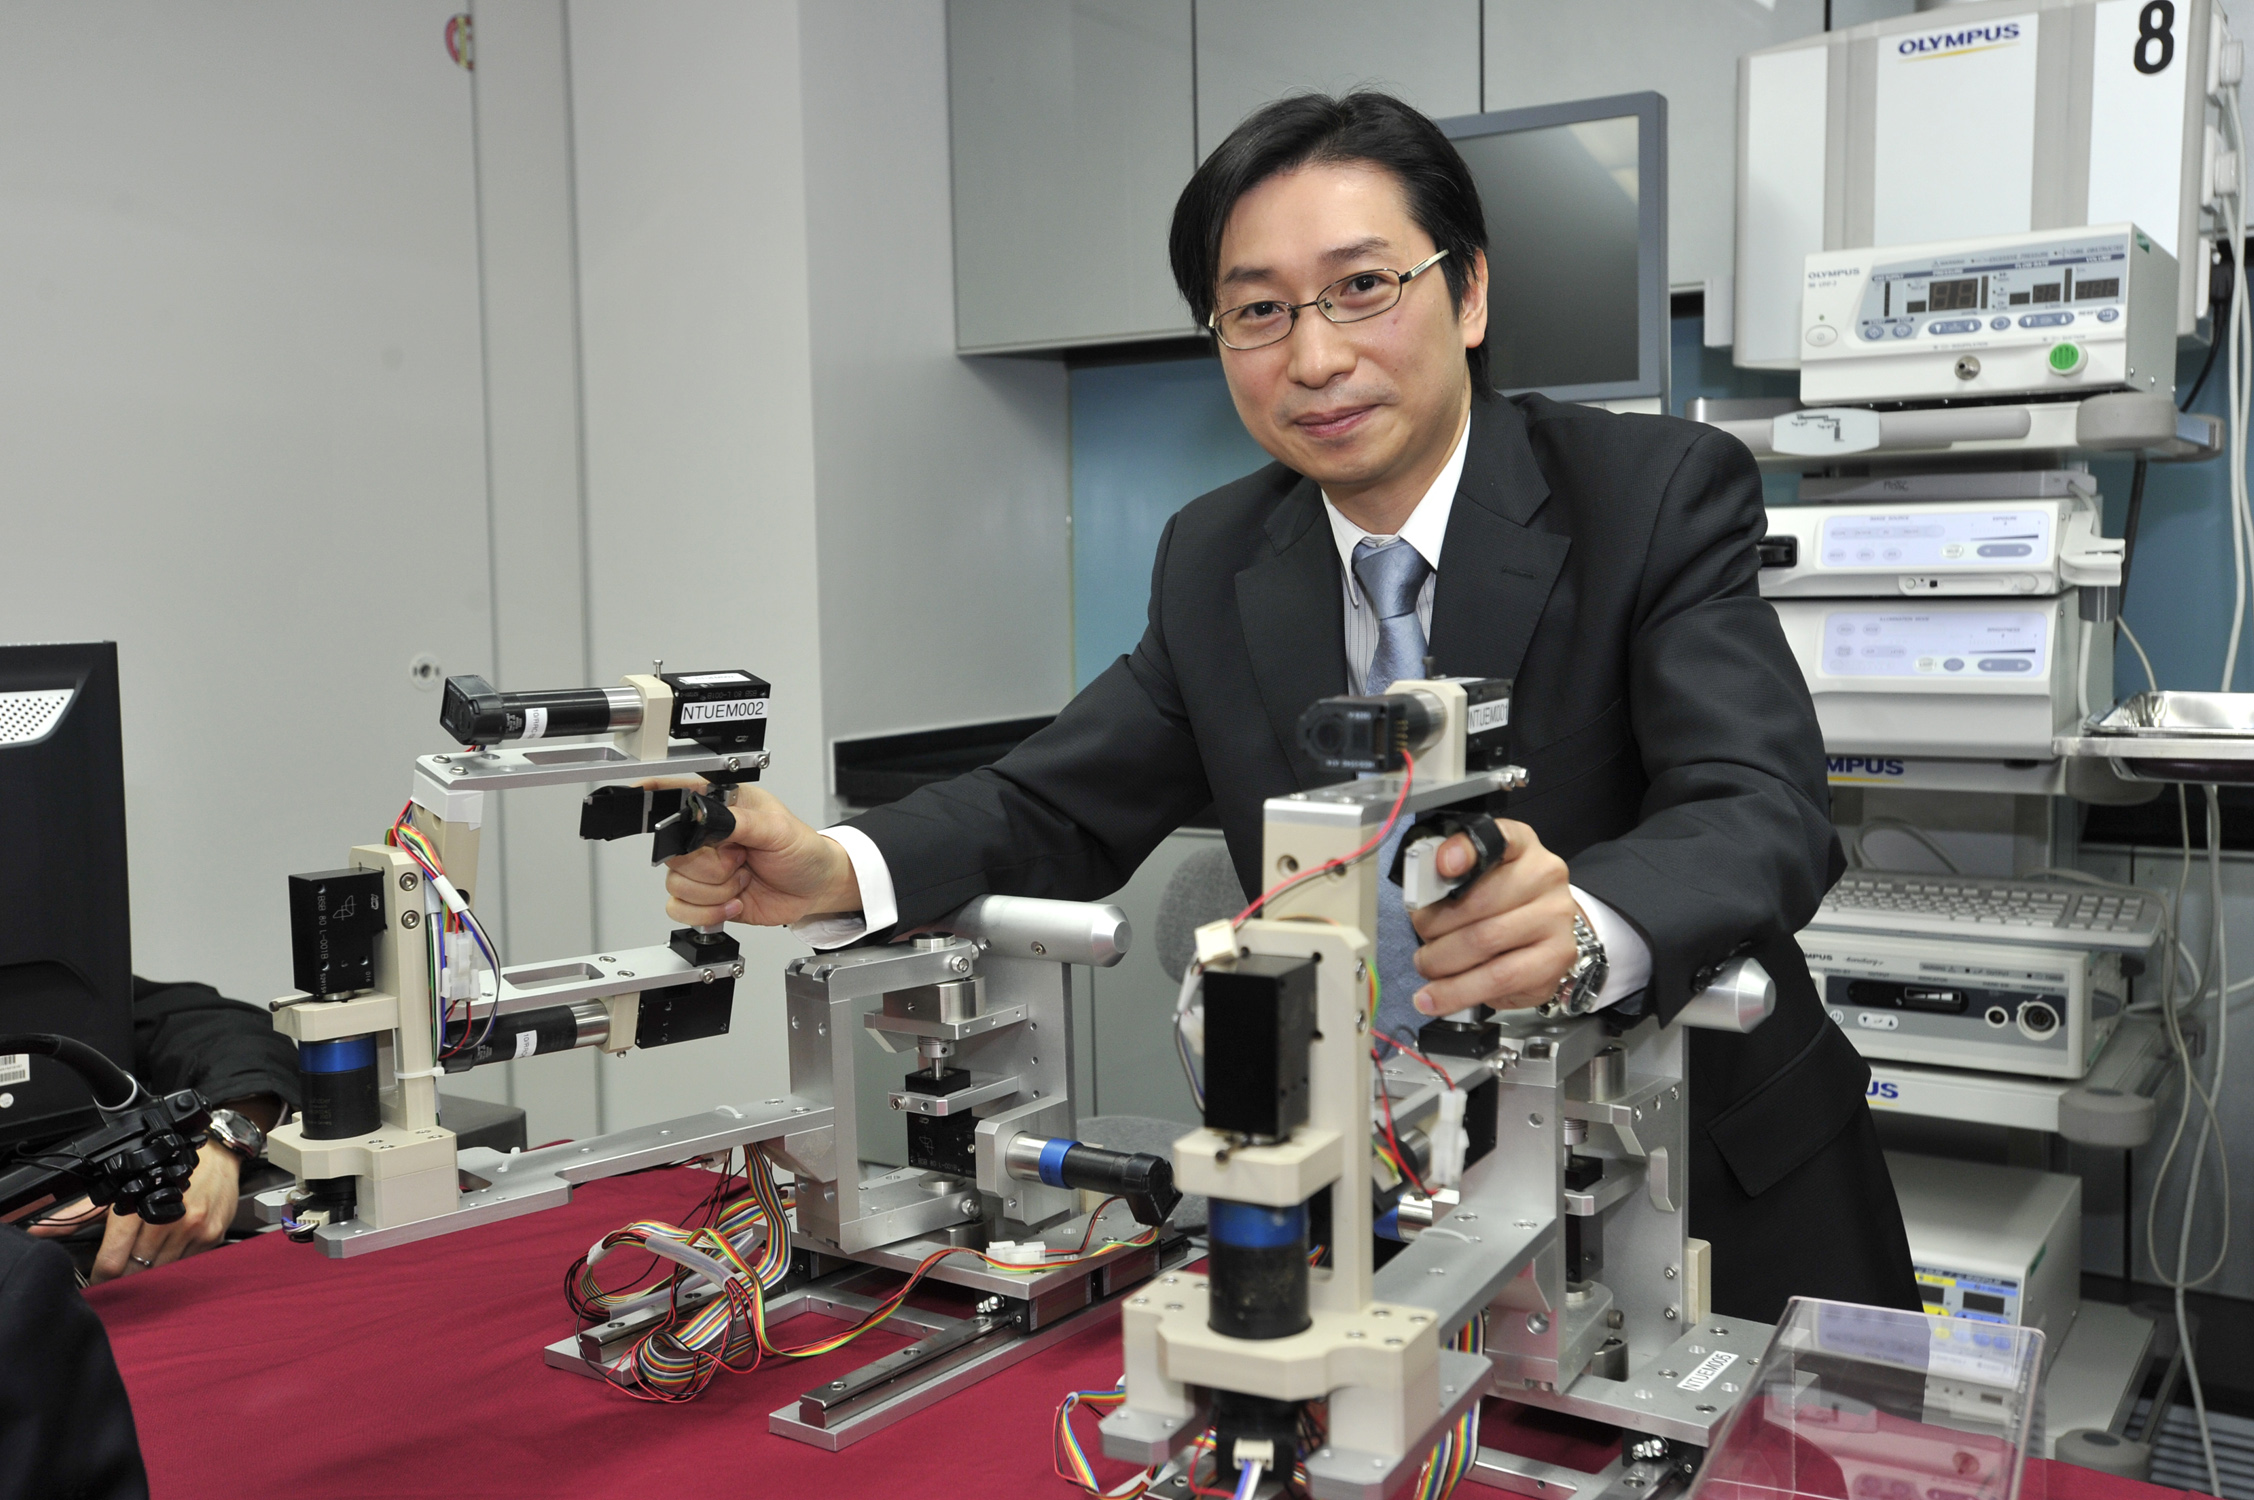 In collaboration with the researchers from Singapore, Professor Philip Wai Yan CHIU of Department of Surgery at CUHK performed the first two cases of Robotic assisted ESD for the treatment of early gastric neoplasia in Hong Kong